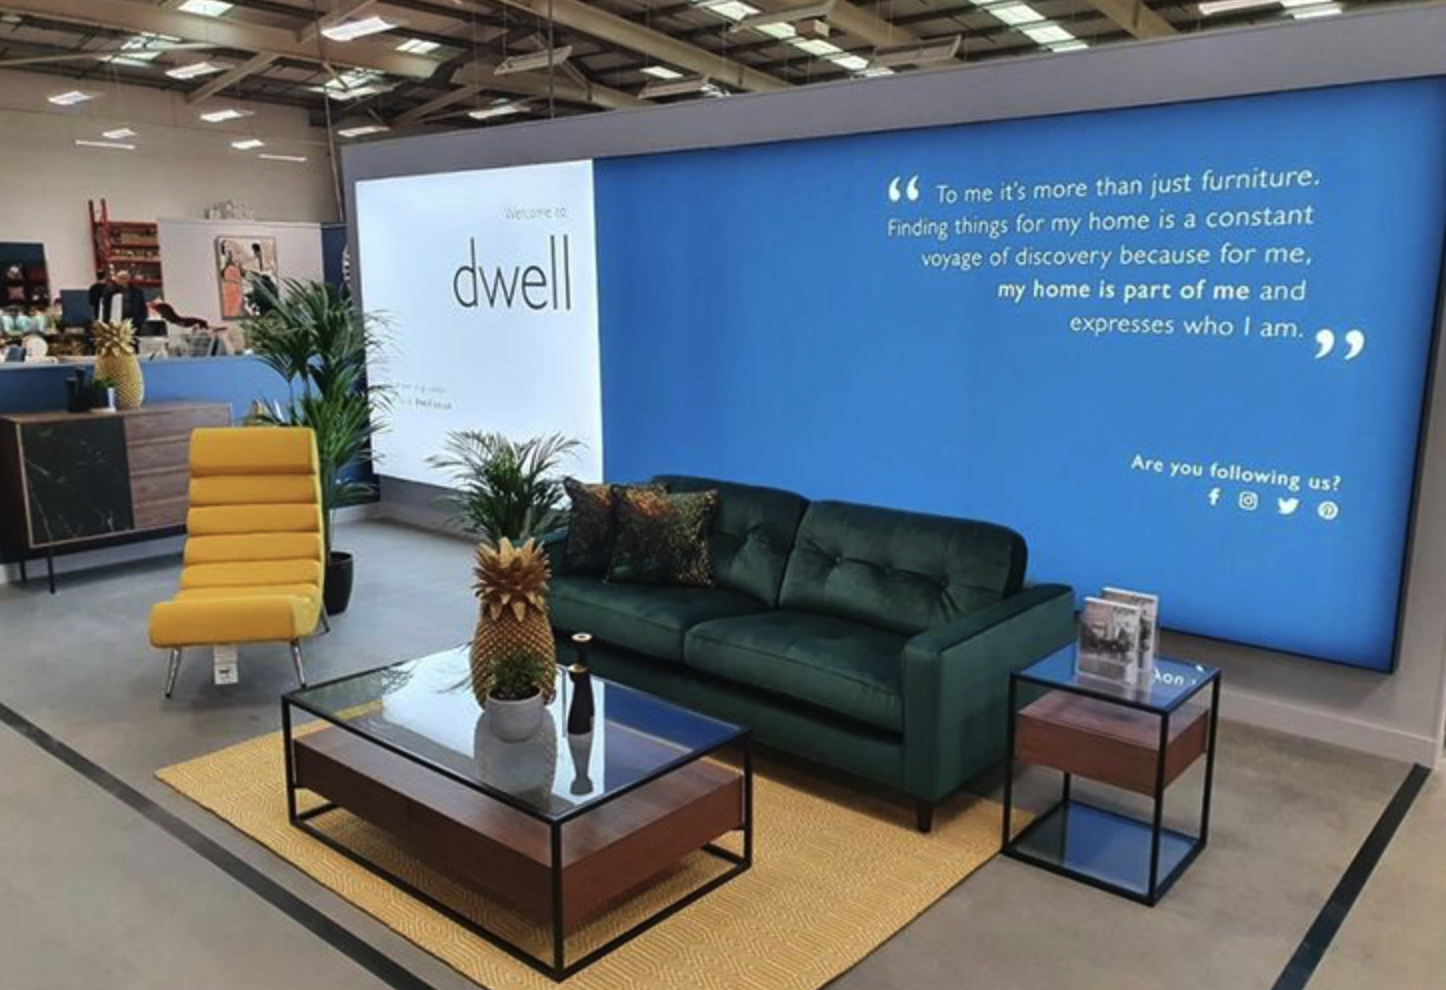 Homebase announces partnership with Dwell